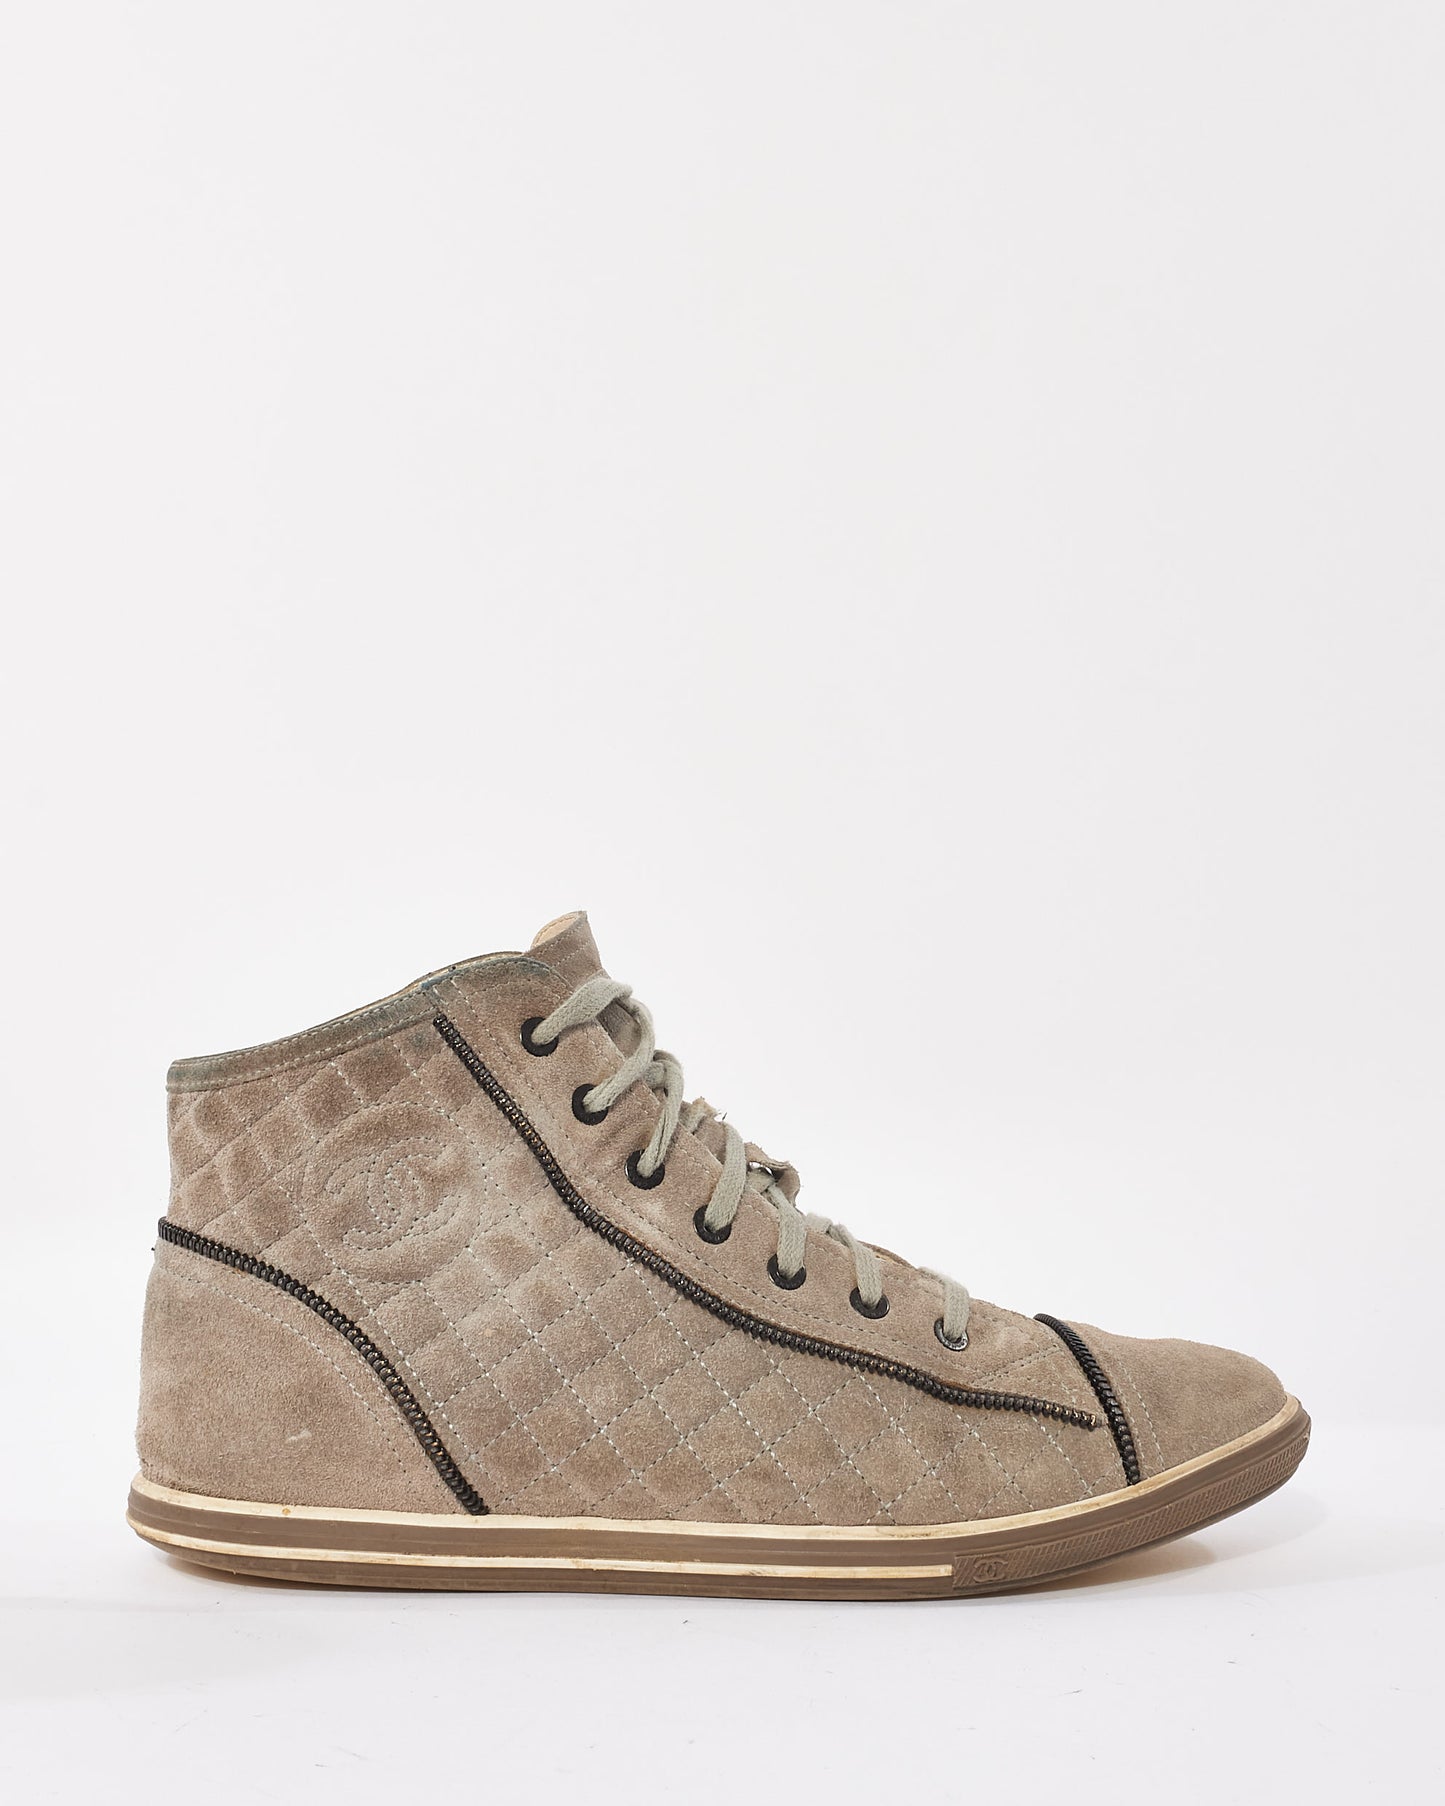 Chanel Grey Suede Quilted Logo High Top Sneakers - 41